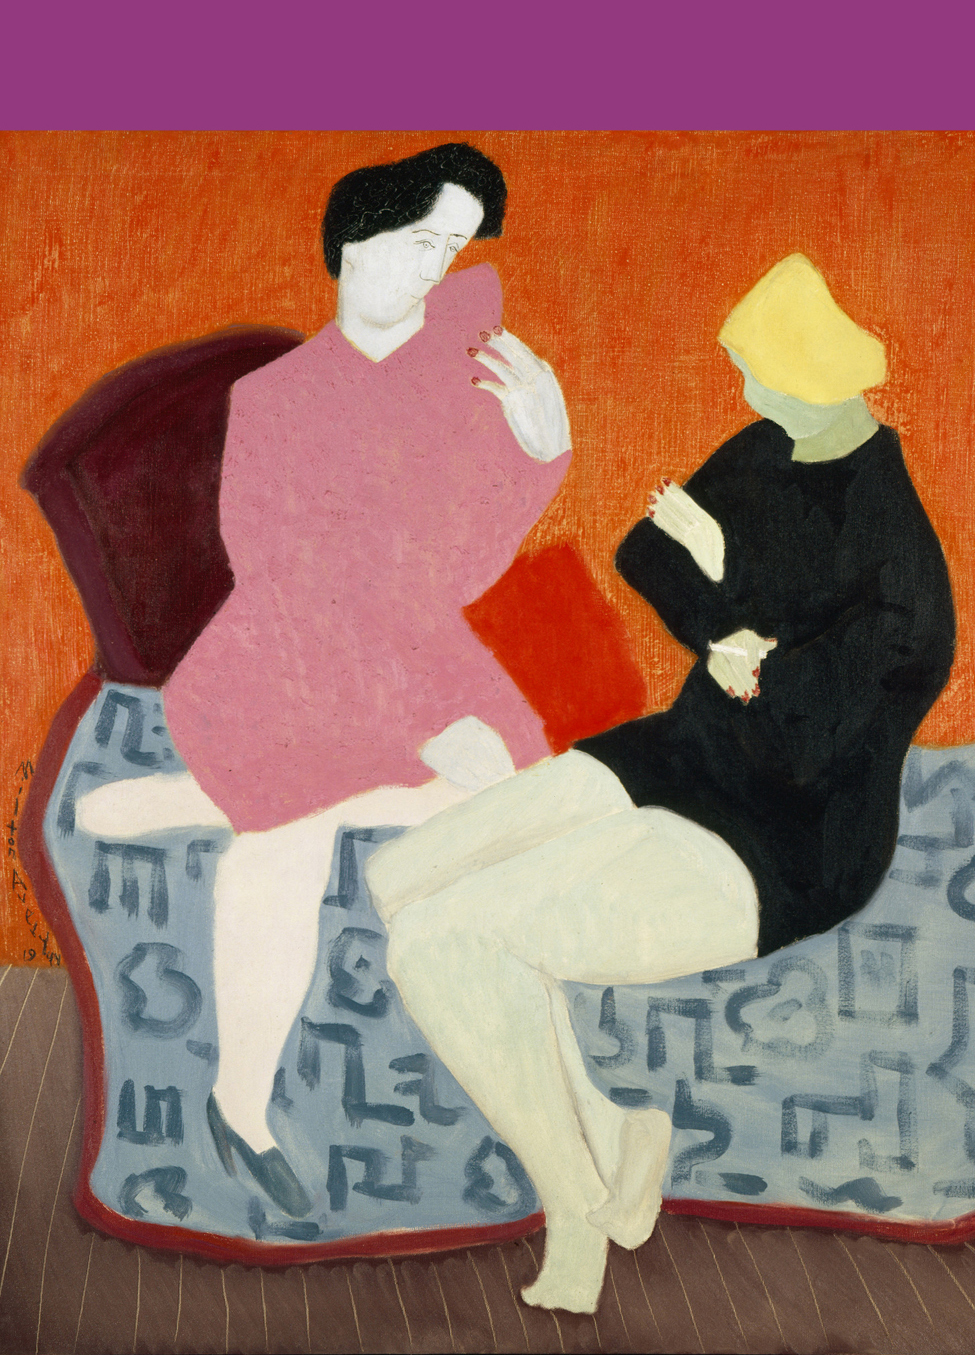 Milton Avery (American, 1893-1965), Discussion, 1944